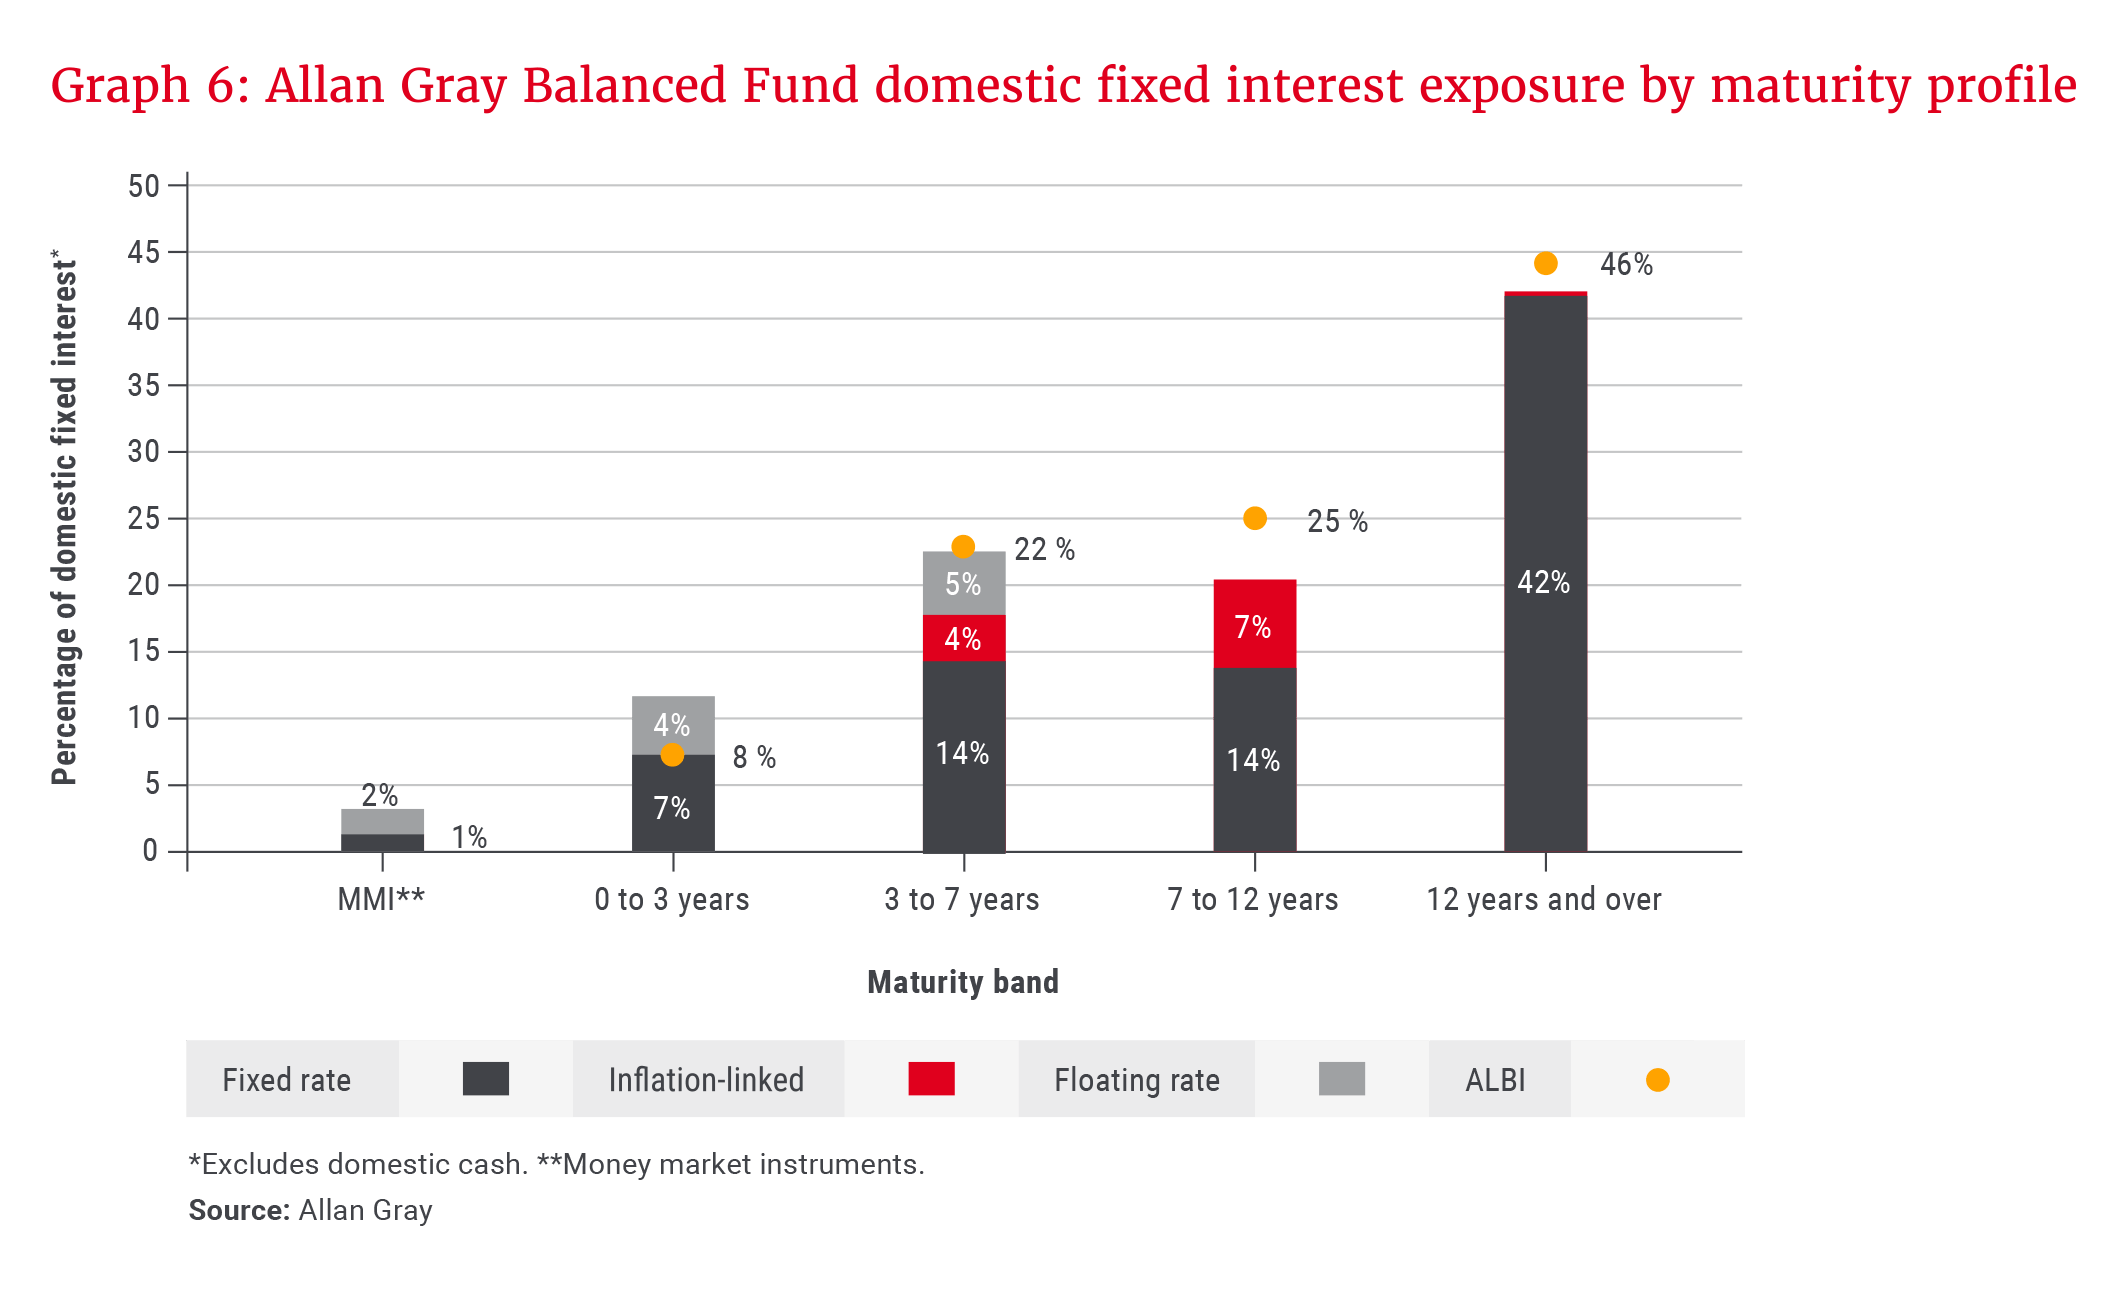 Allan Gray Balanced Fund domestic fixed interest exposure by maturity profile